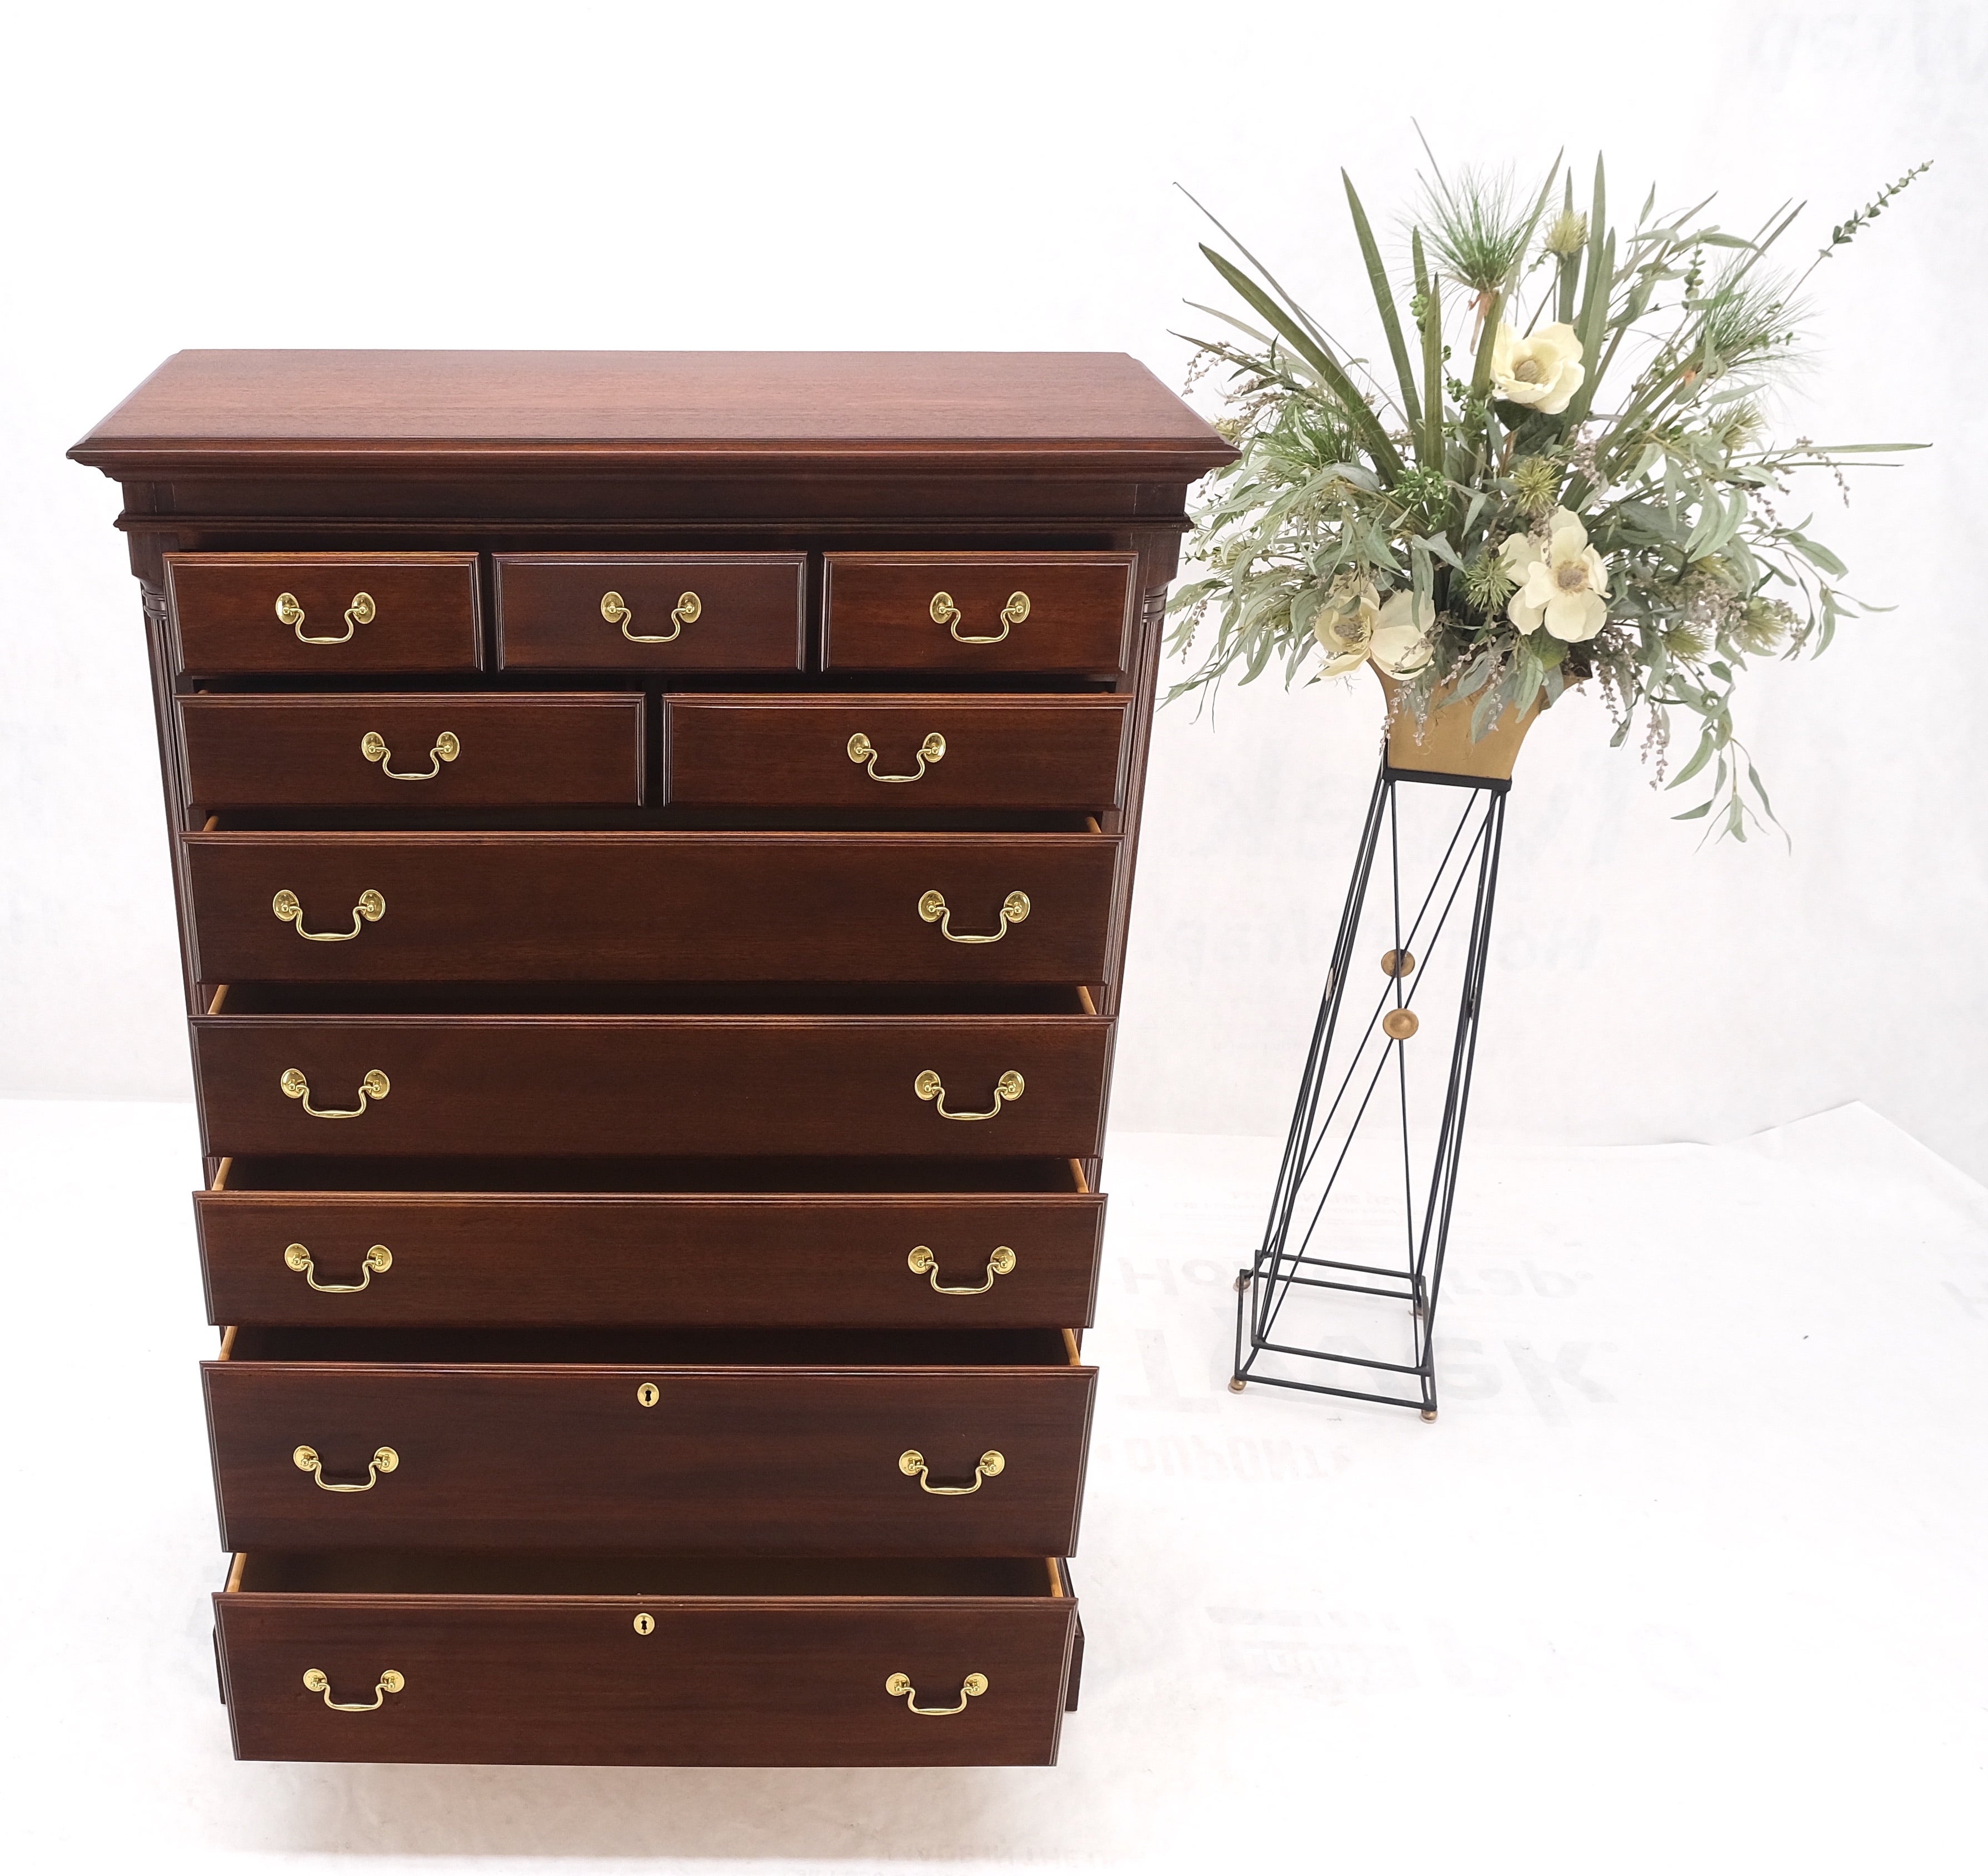 Mid-Century Modern Solid Mahogany Brass Drop Pulls Federal High Boy Dresser Chest of Drawers MINT! For Sale